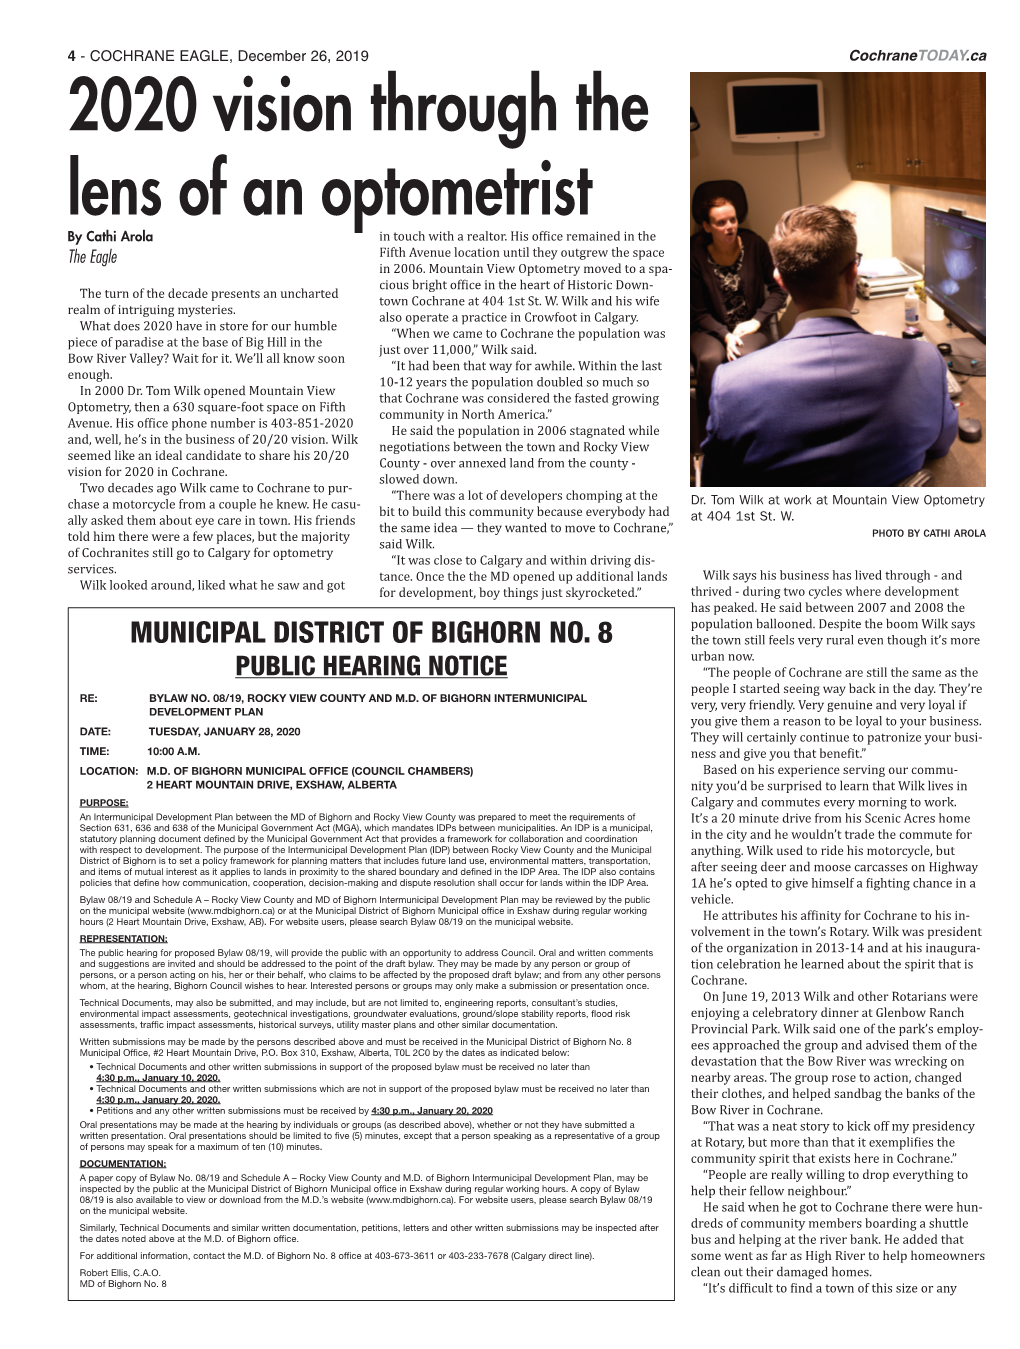 2020 Vision Through the Lens of an Optometrist by Cathi Arola the Eagle Fifth Avenue Location Until They Outgrew the Space in 2006.Touch Withmountain a Realtor